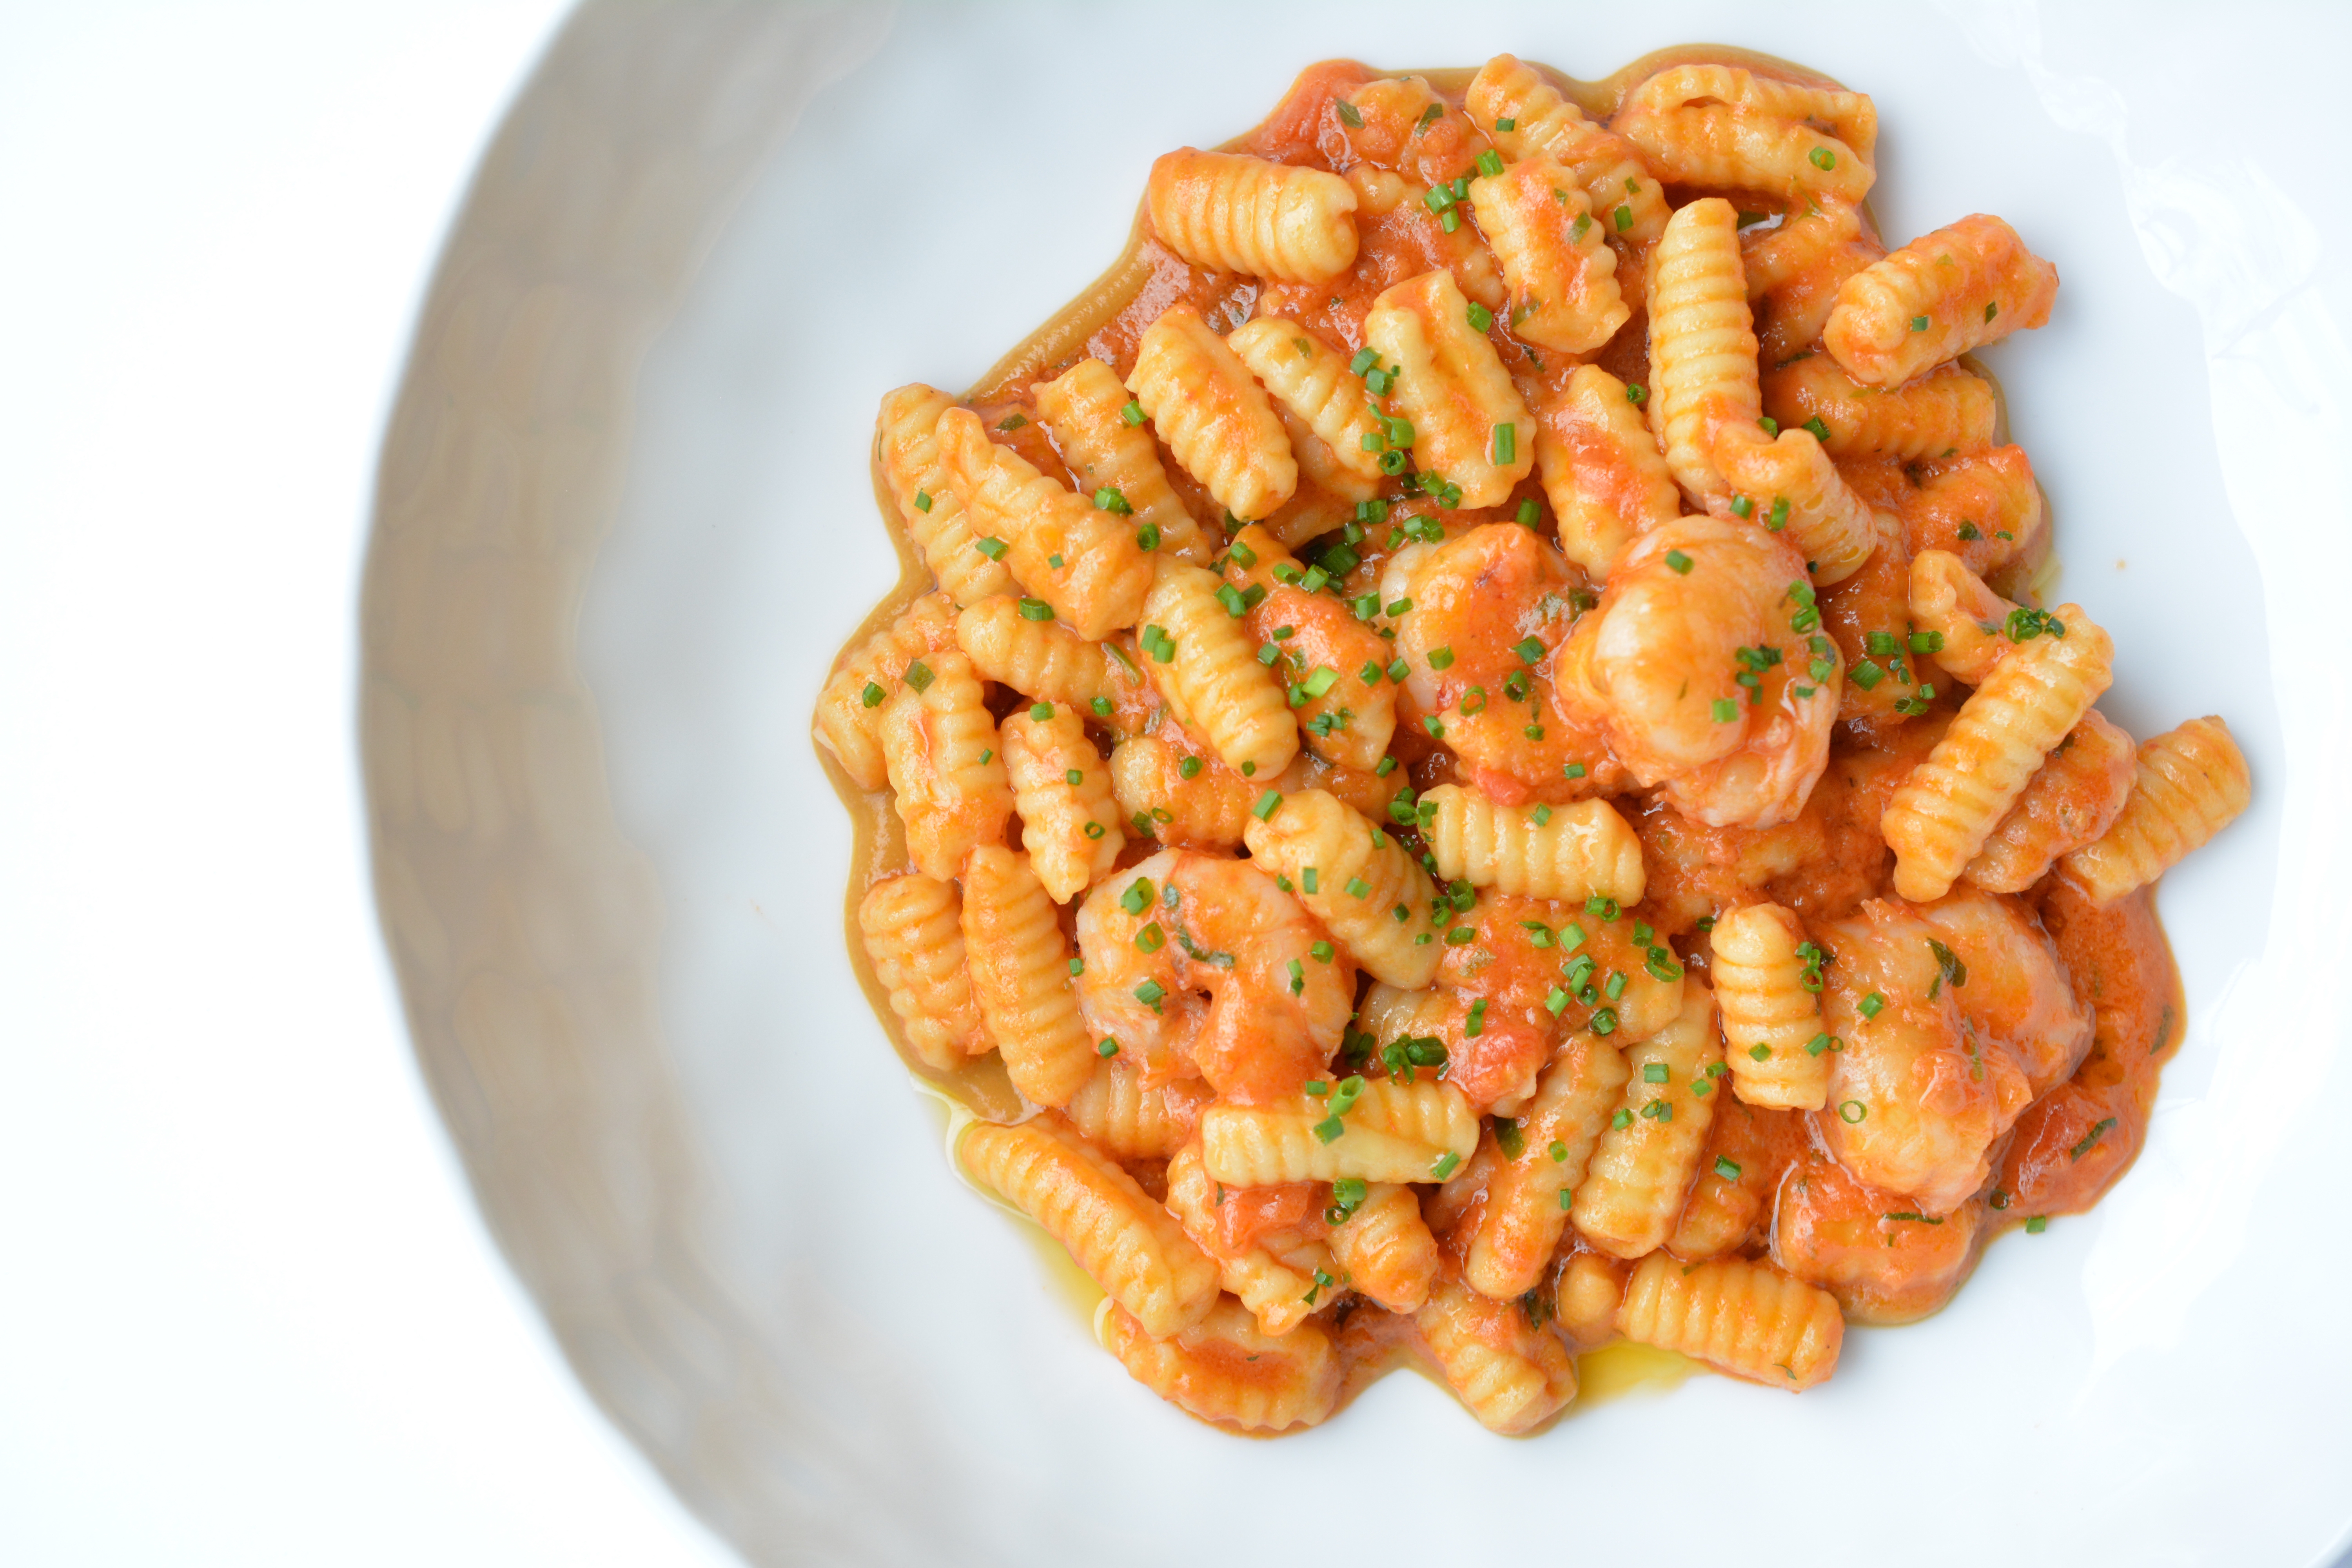 Ridged, oblong gnocchetti sit in a white bowl with a pink-ish tomato sauce